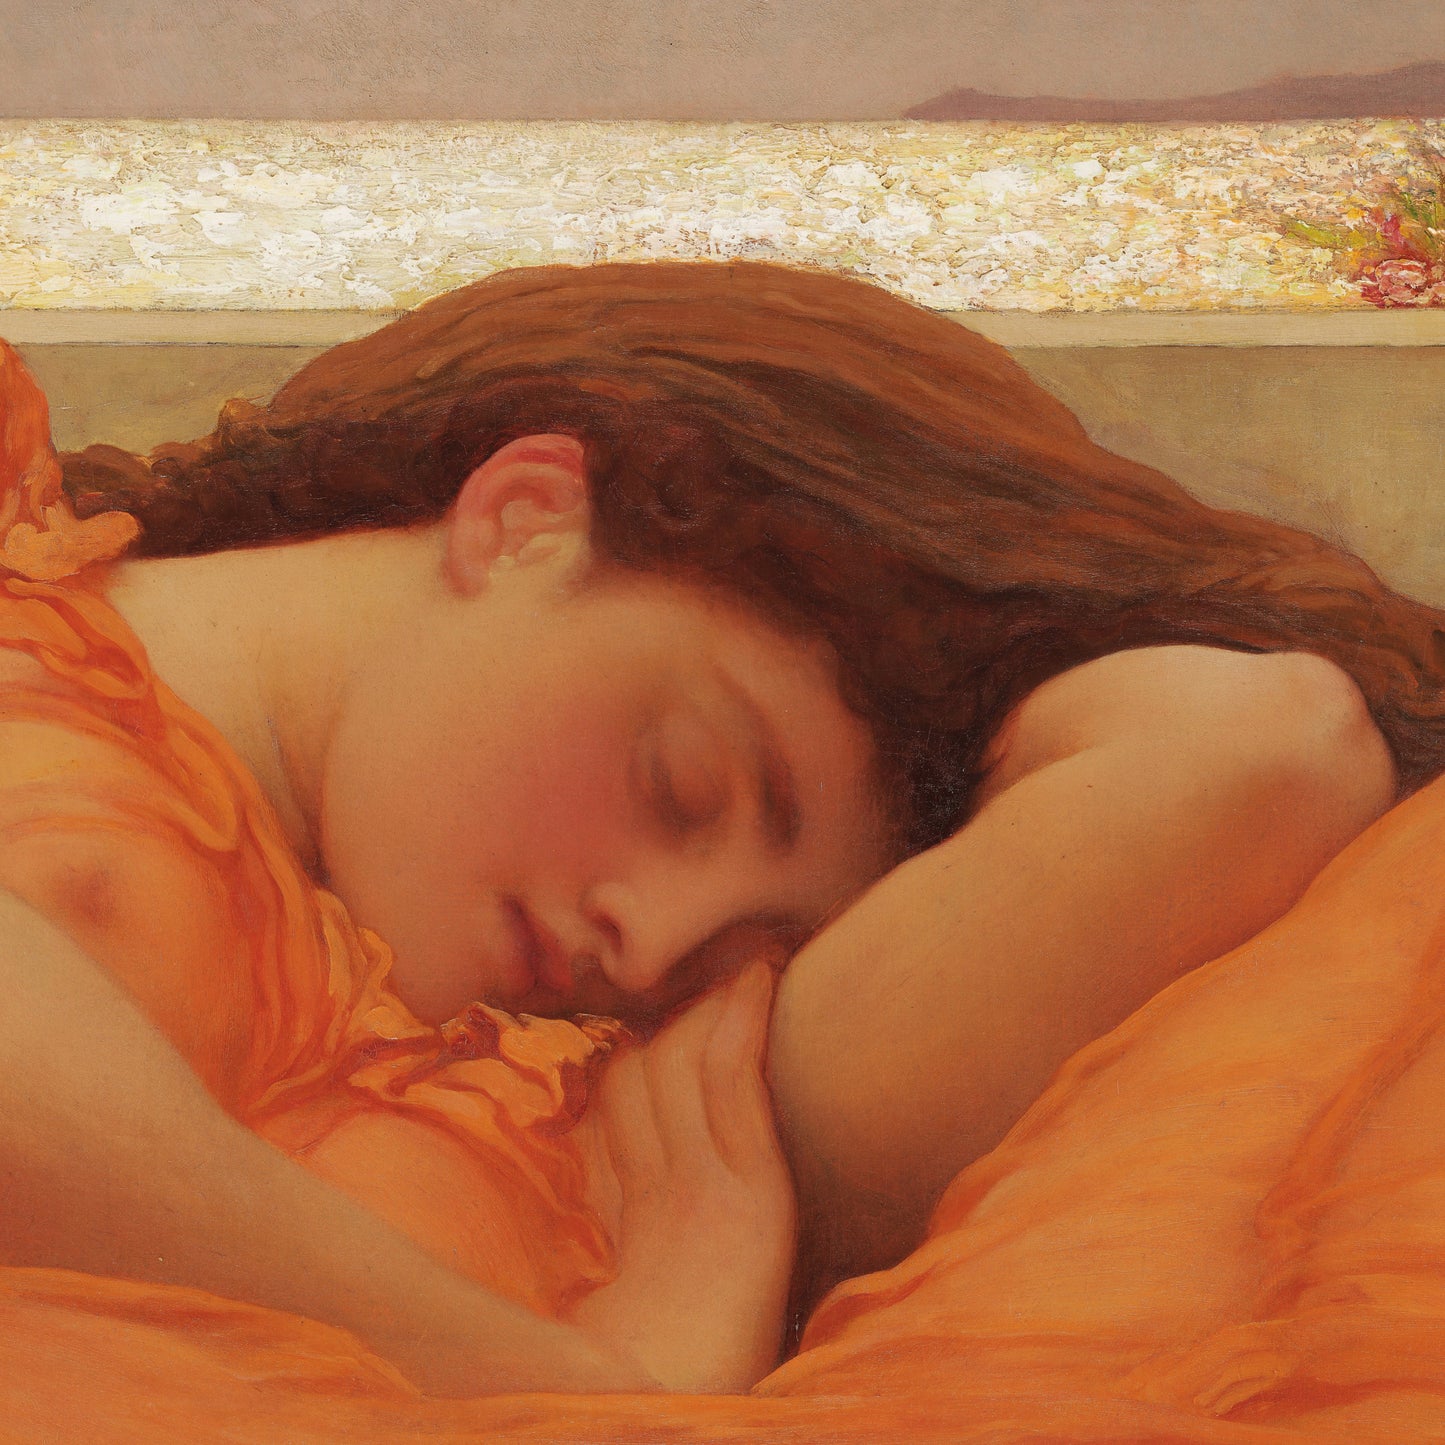 Flaming June by Frederic Leighton, 3d Printed with texture and brush strokes looks like original oil-painting, code:029